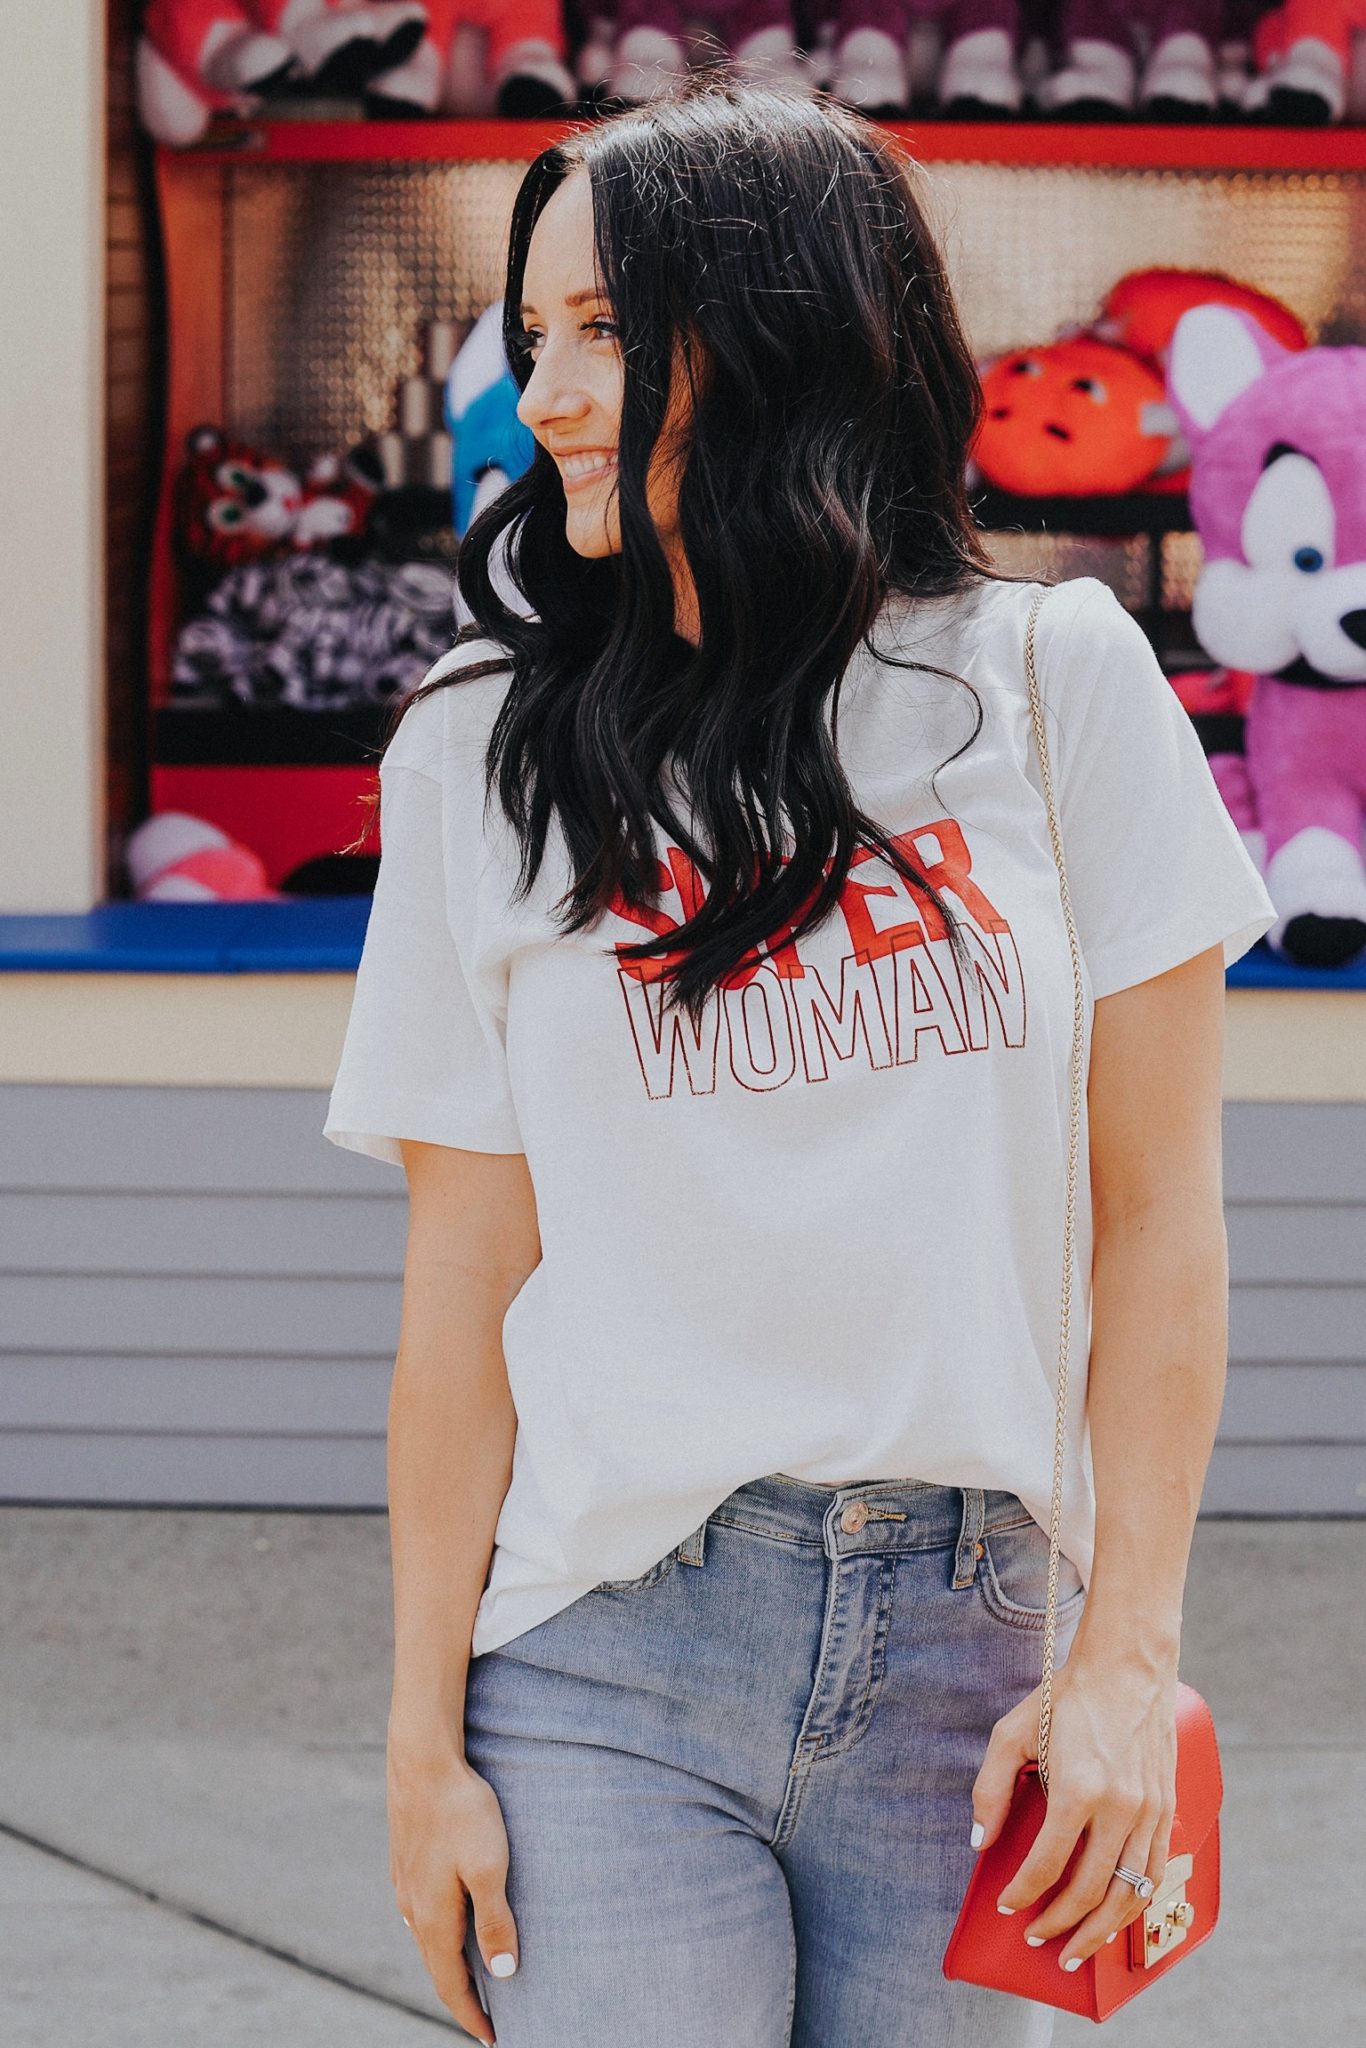 Rebeccah Minkoff Super Woman Tee Shirt styled by popular Las Vegas fashion blogger, Outfits & Outings